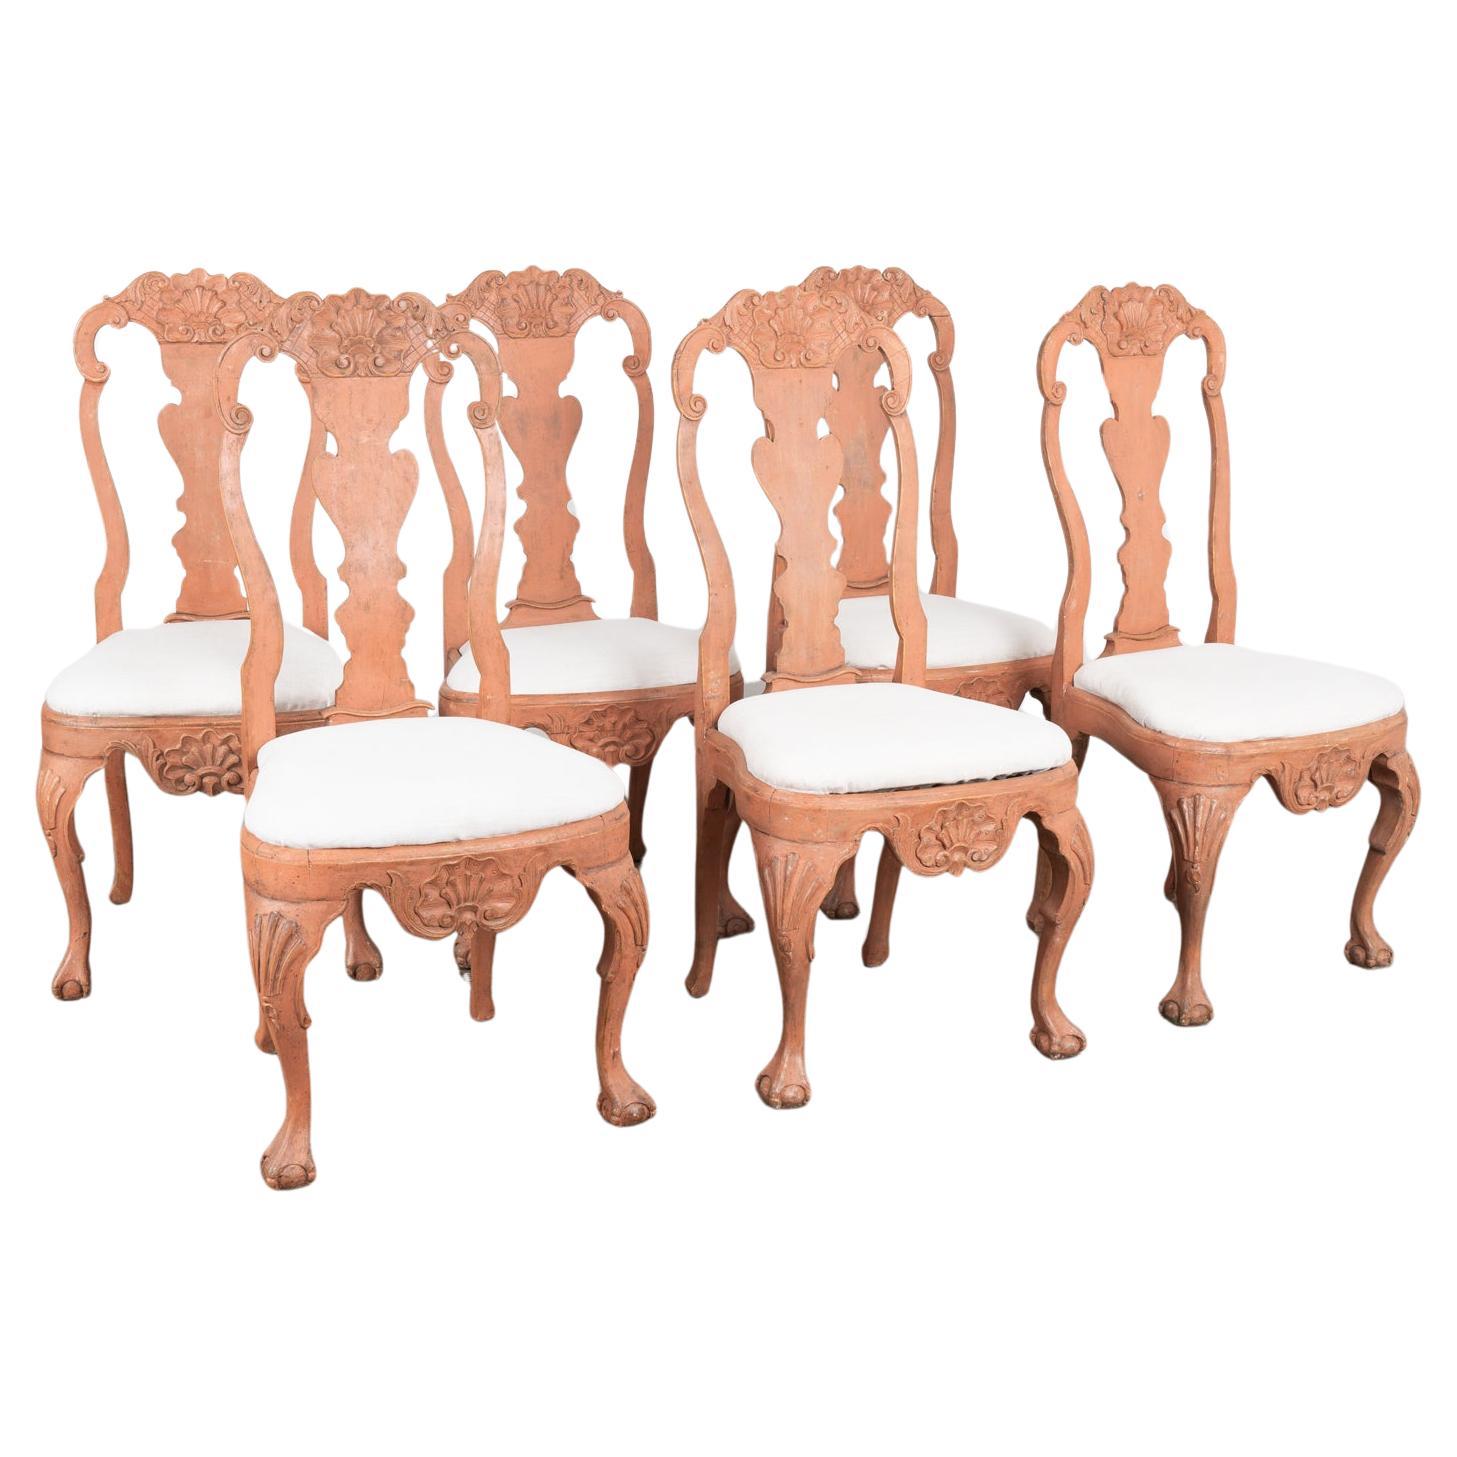 Set of 6 Rococo Dining Chairs, Norway circa 1770-1800